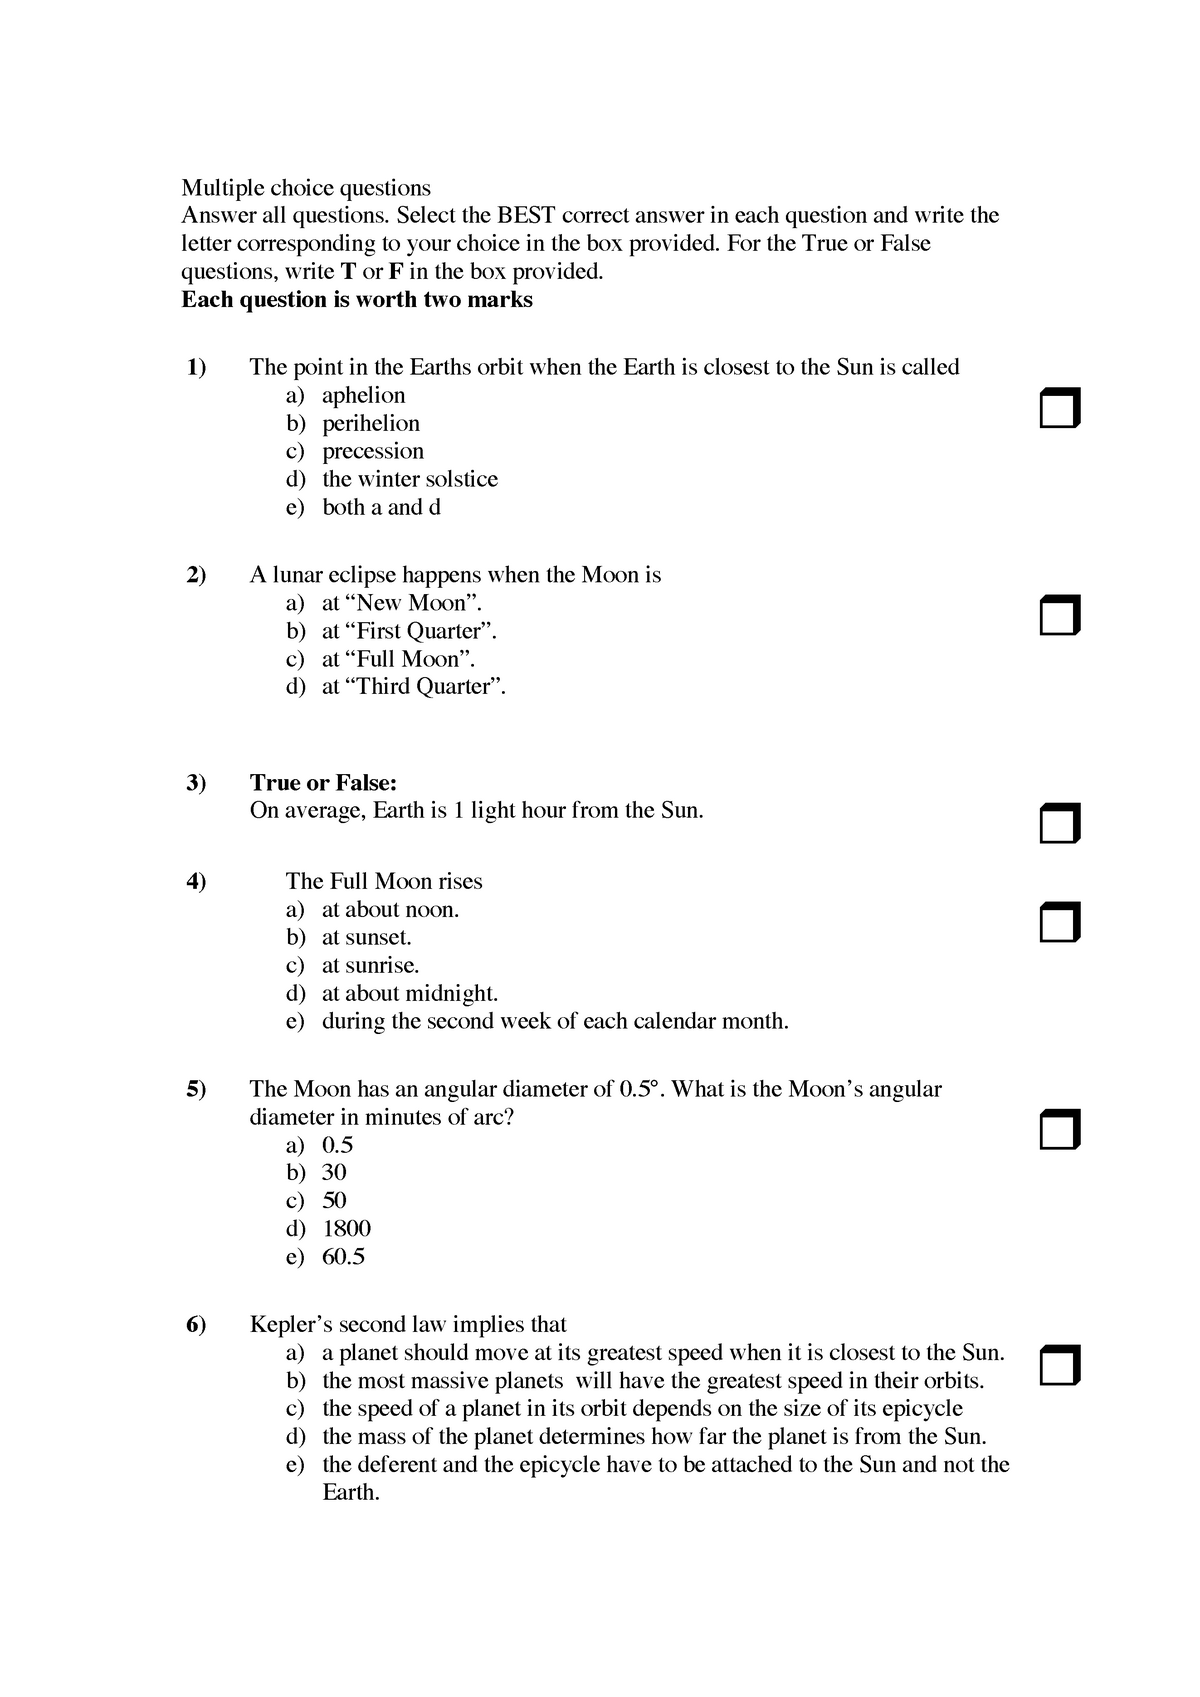 Exam 05 Questions Multiple Choice Questions Answer All Questions Select The Best Correct Studocu